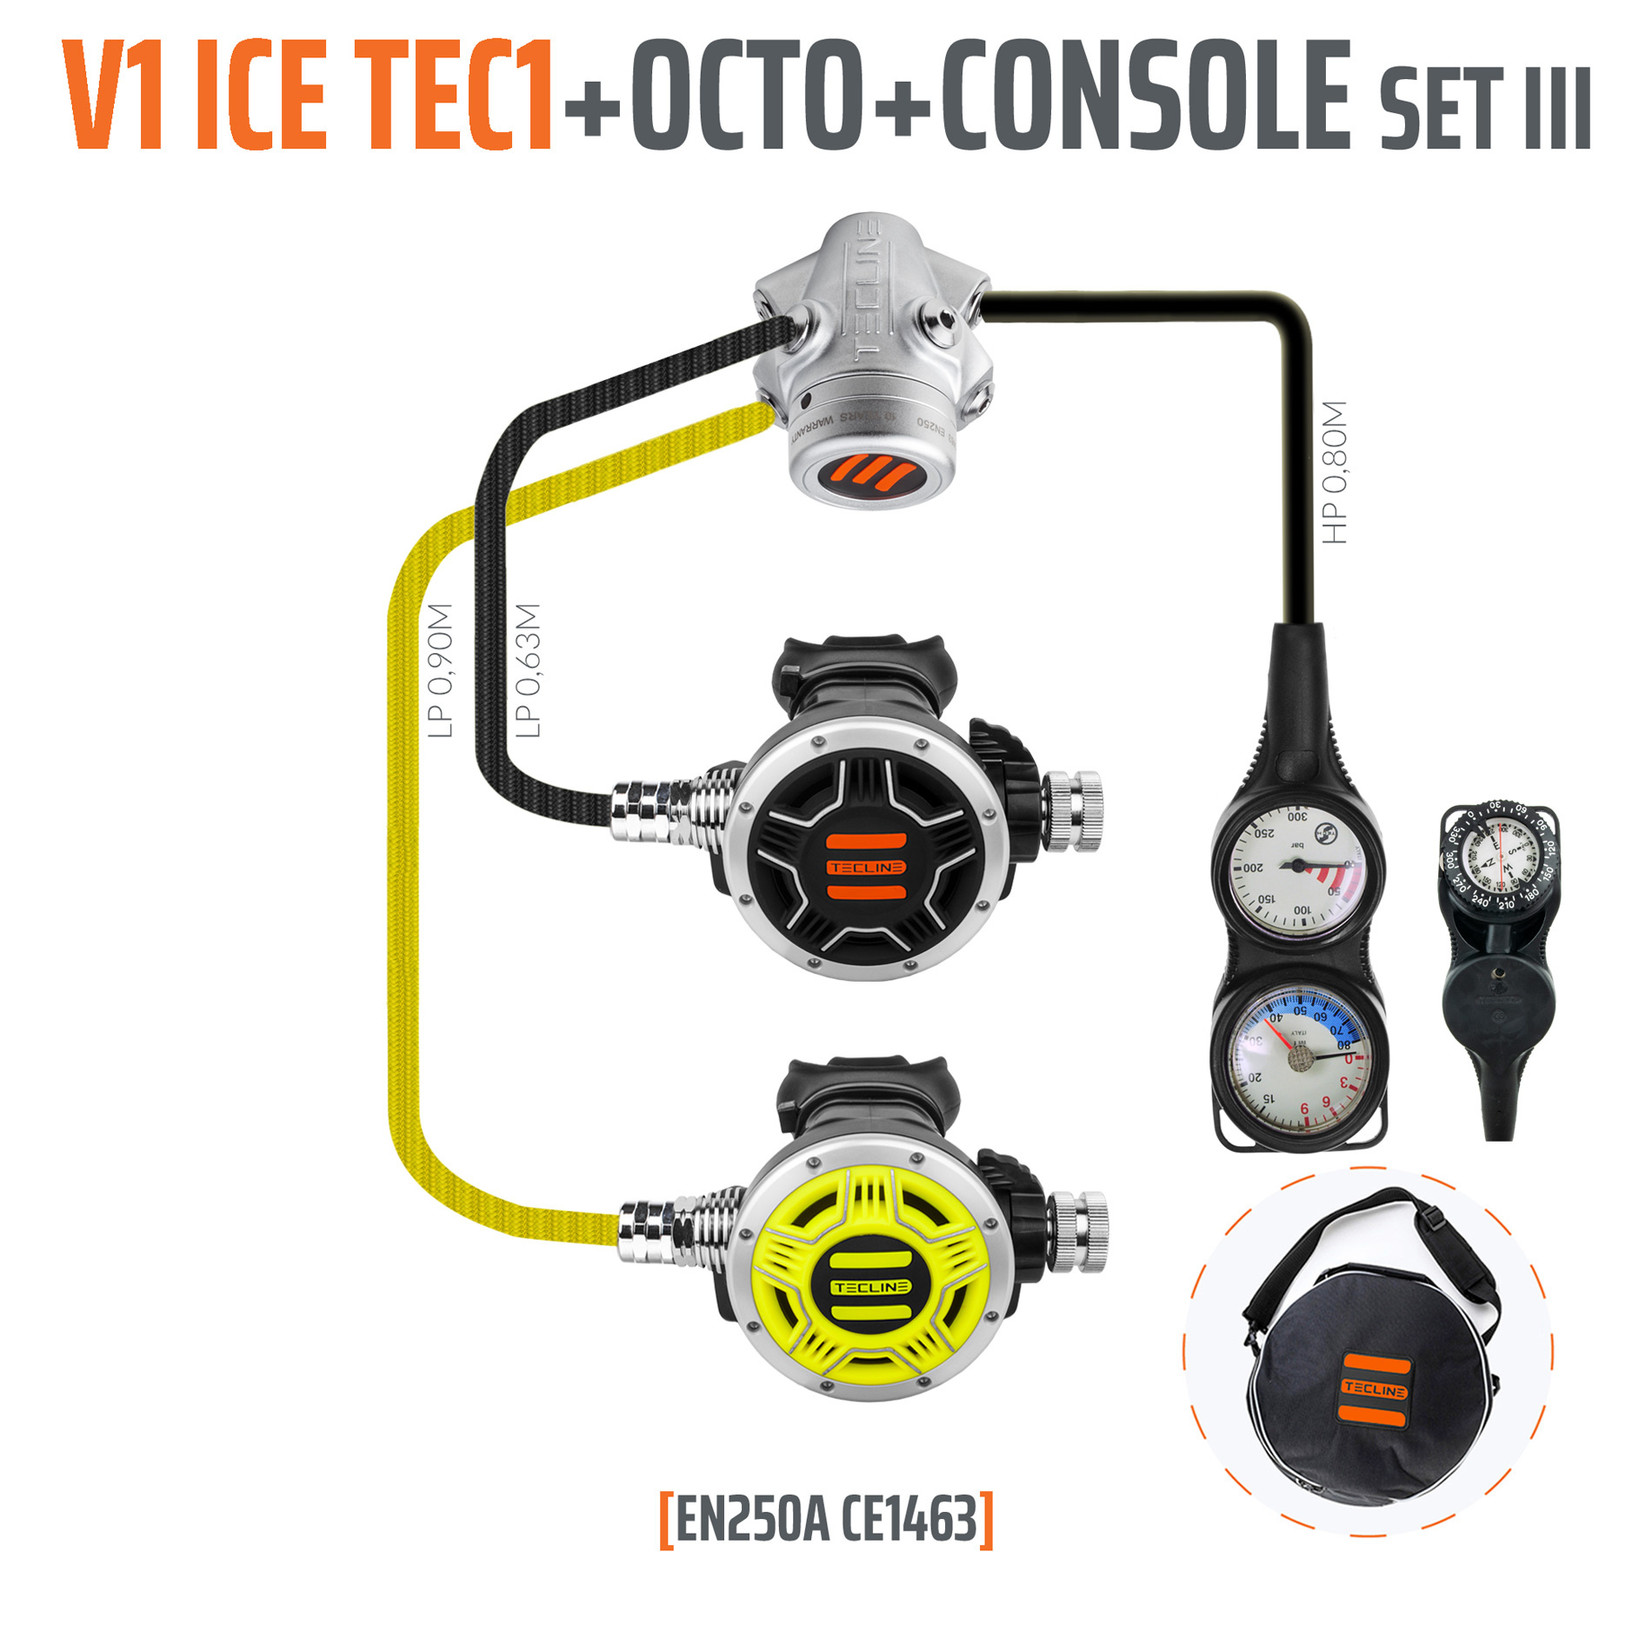 Tecline Regulator V1 ICE TEC1 set III with octo and 3 elements console - EN250A